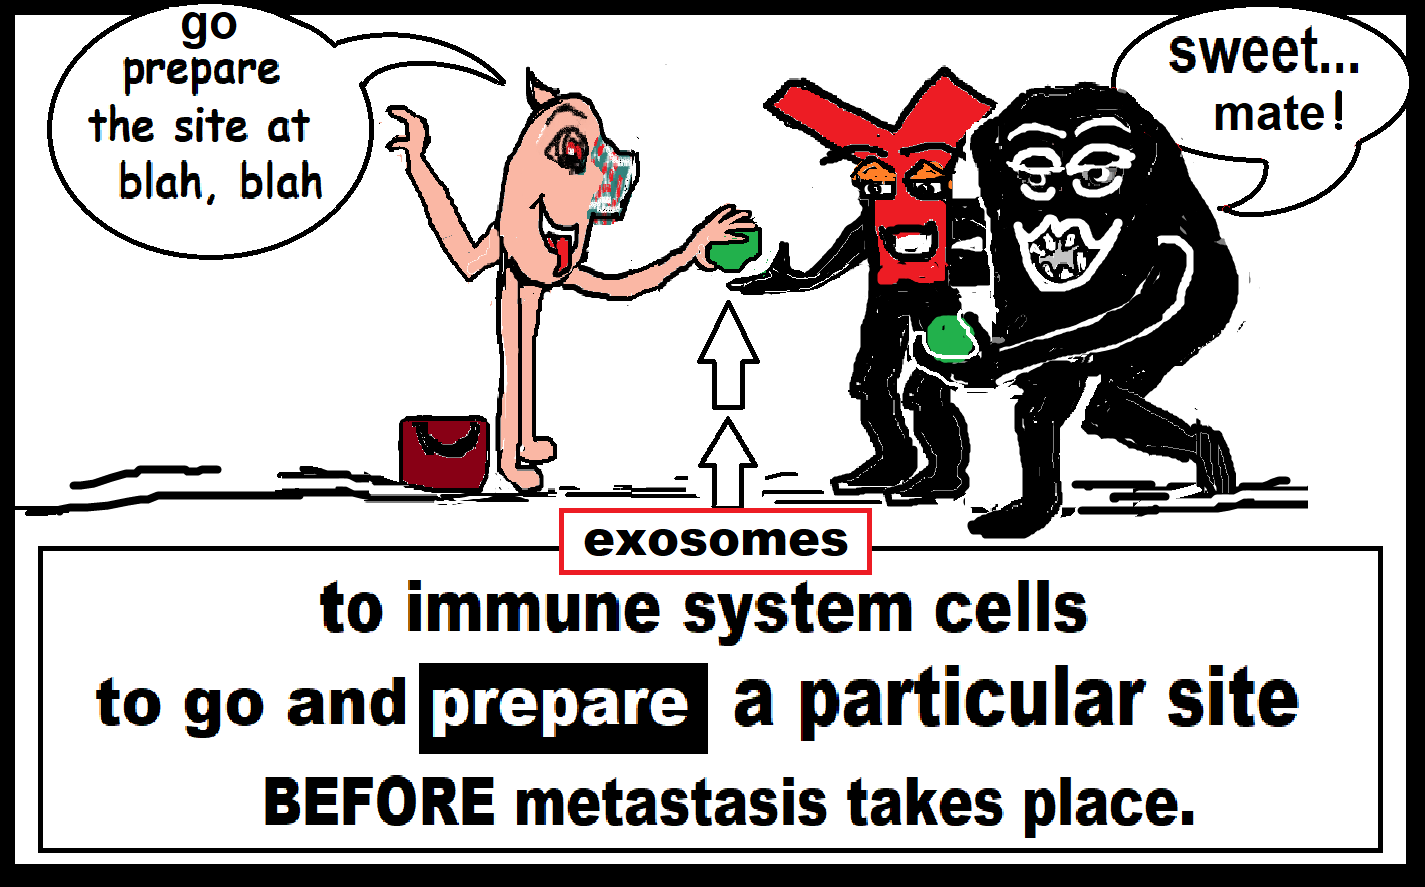 cancer cells give exosomes to IS cellsghf